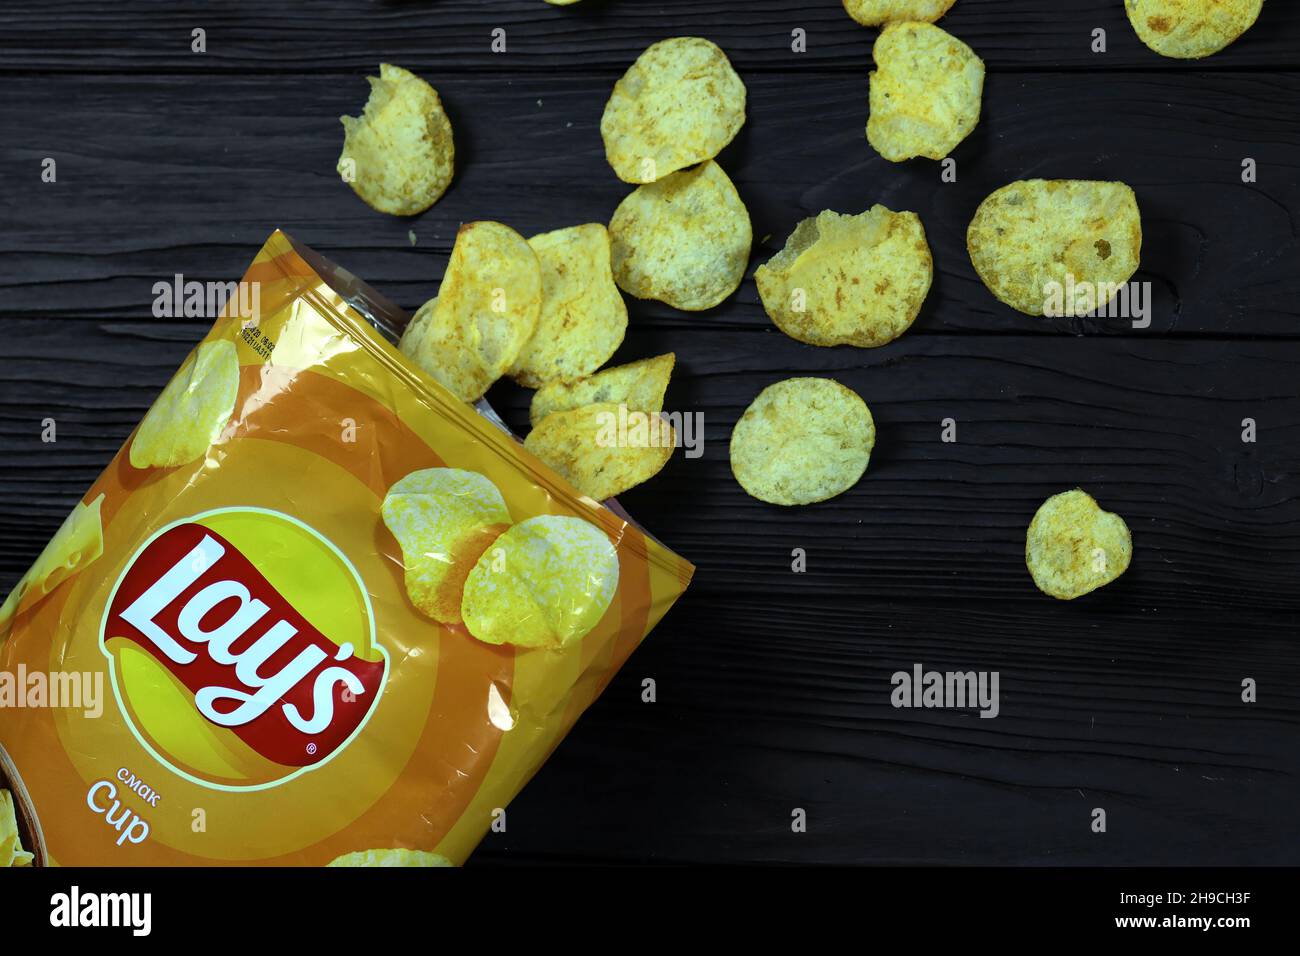 KHARKOV, UKRAINE - JANUARY 3, 2021: Lays potato chips with cheese flavour and original lays logo in middle of package. Worldwide famous brand of potat Stock Photo